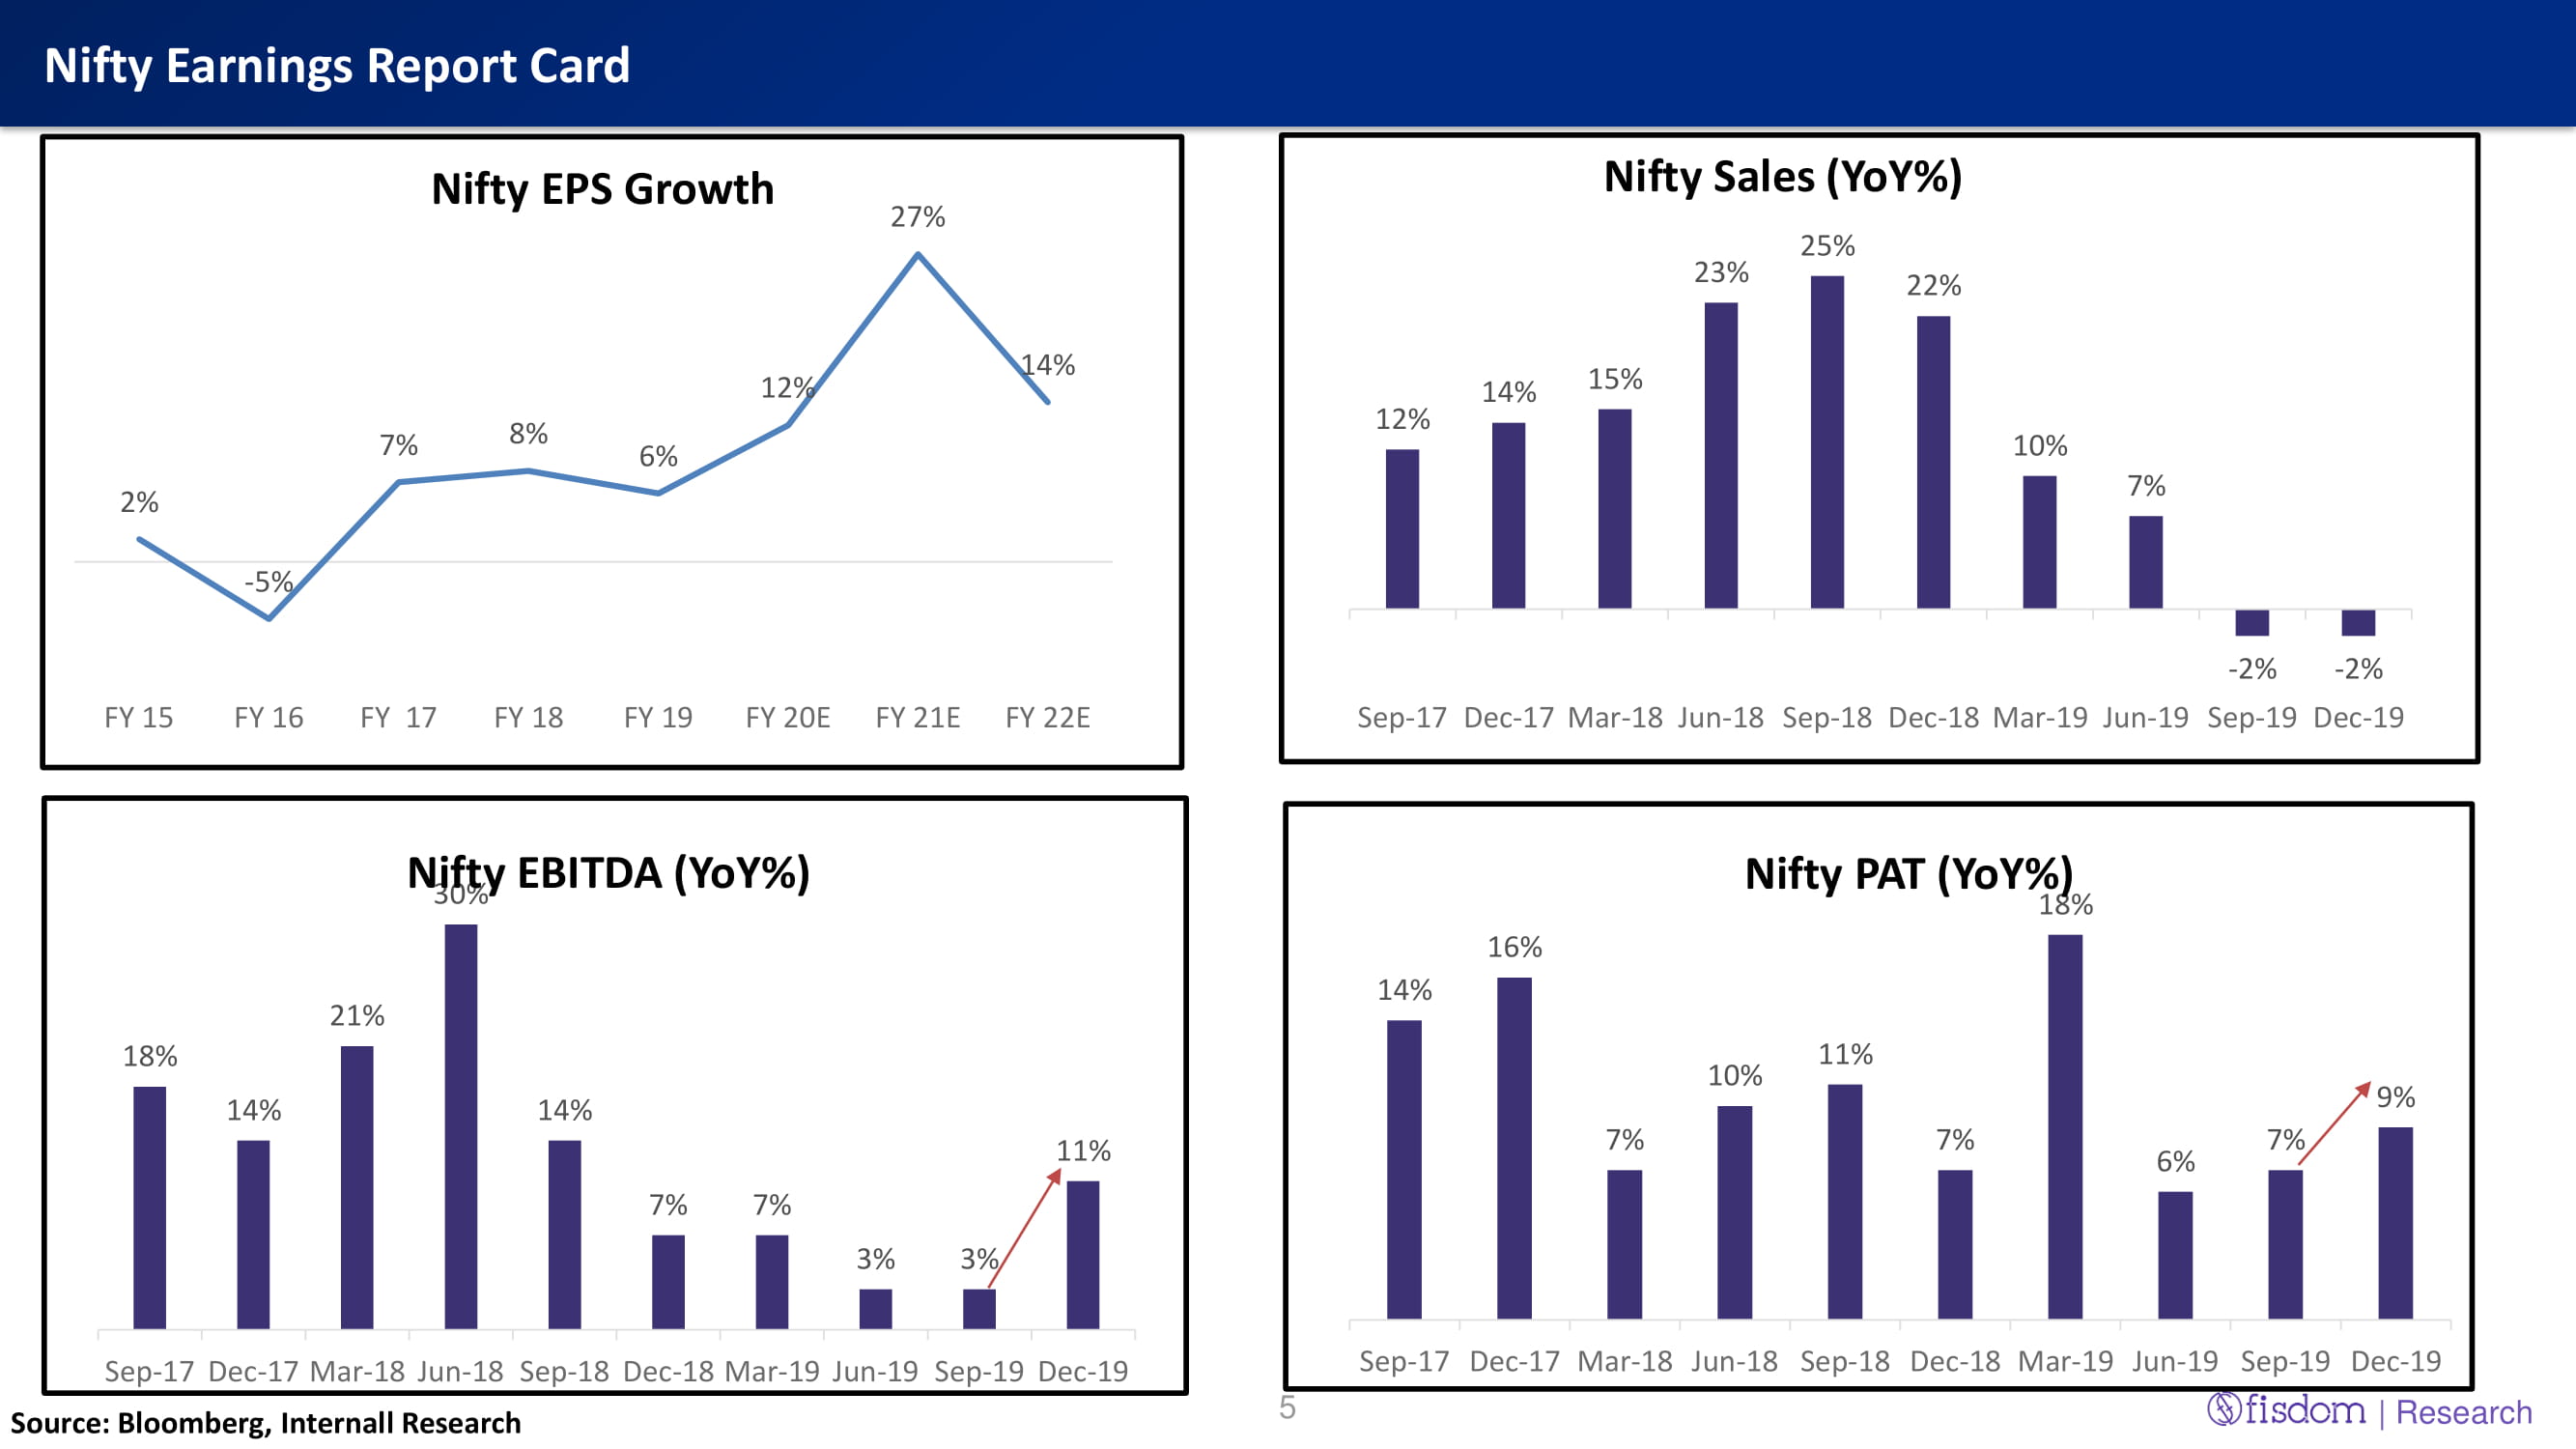 Nifty Earnings Report Card